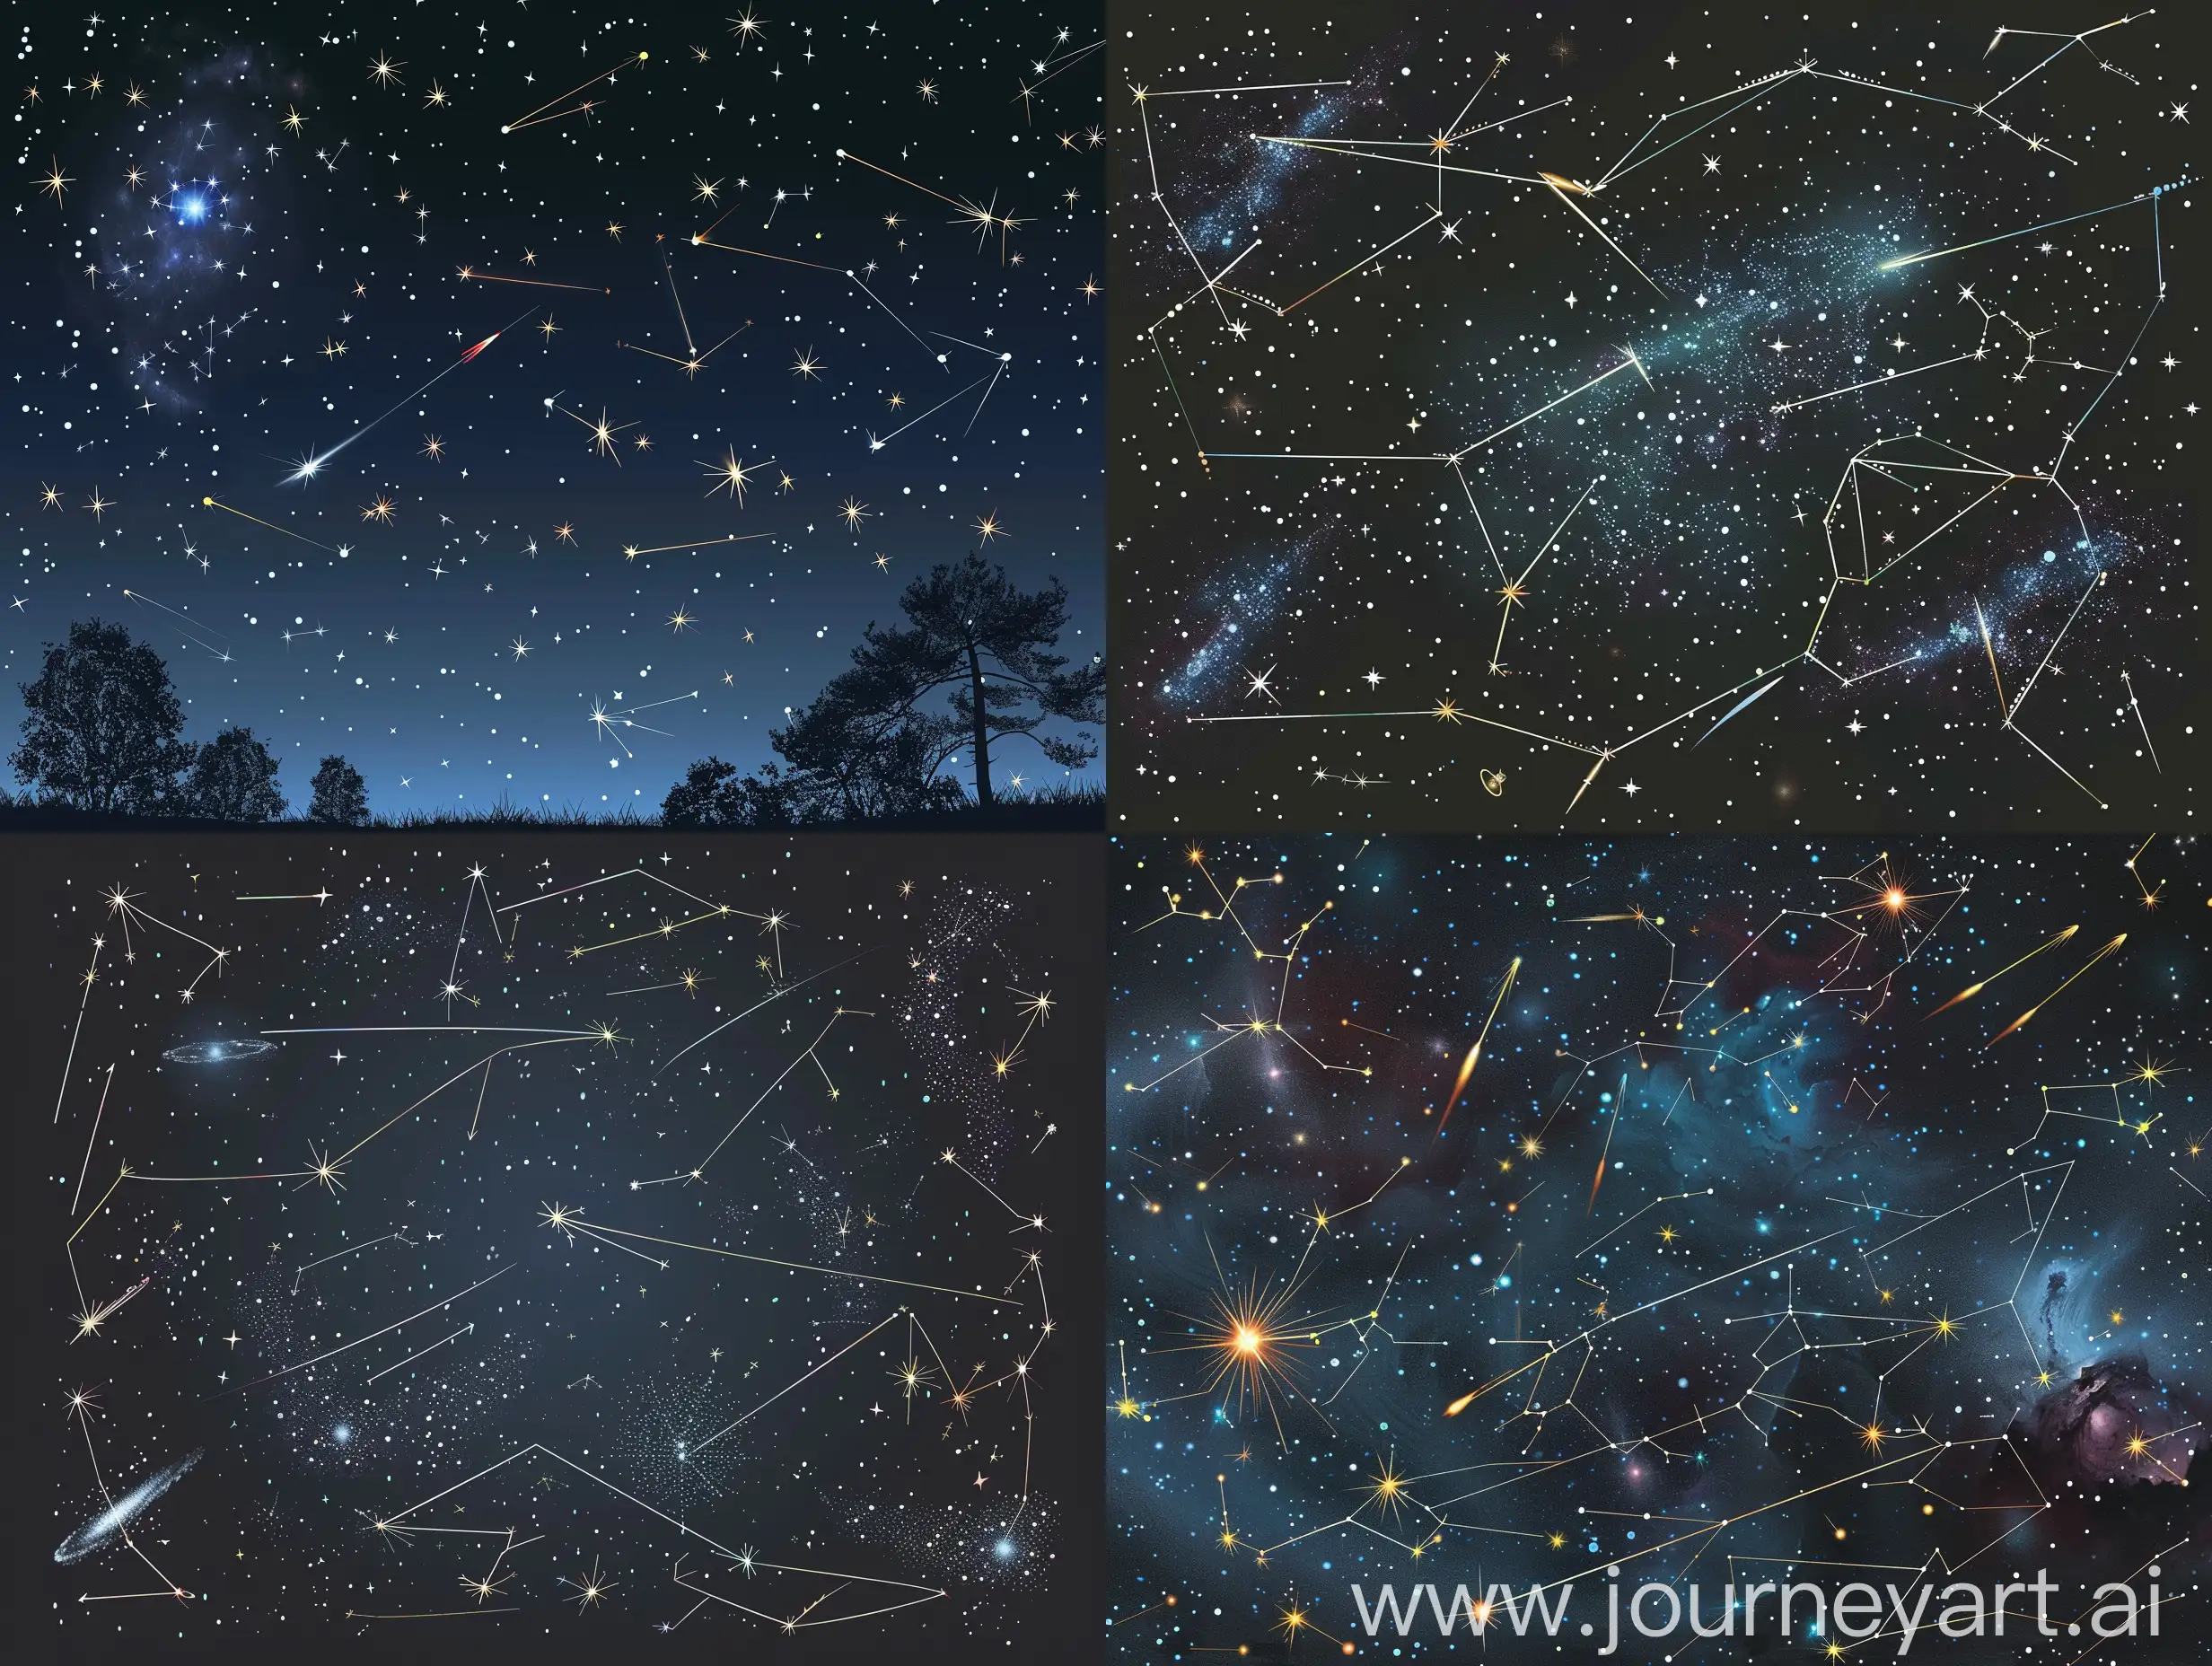 Starry-Night-Sky-with-Shooting-Stars-and-Constellations